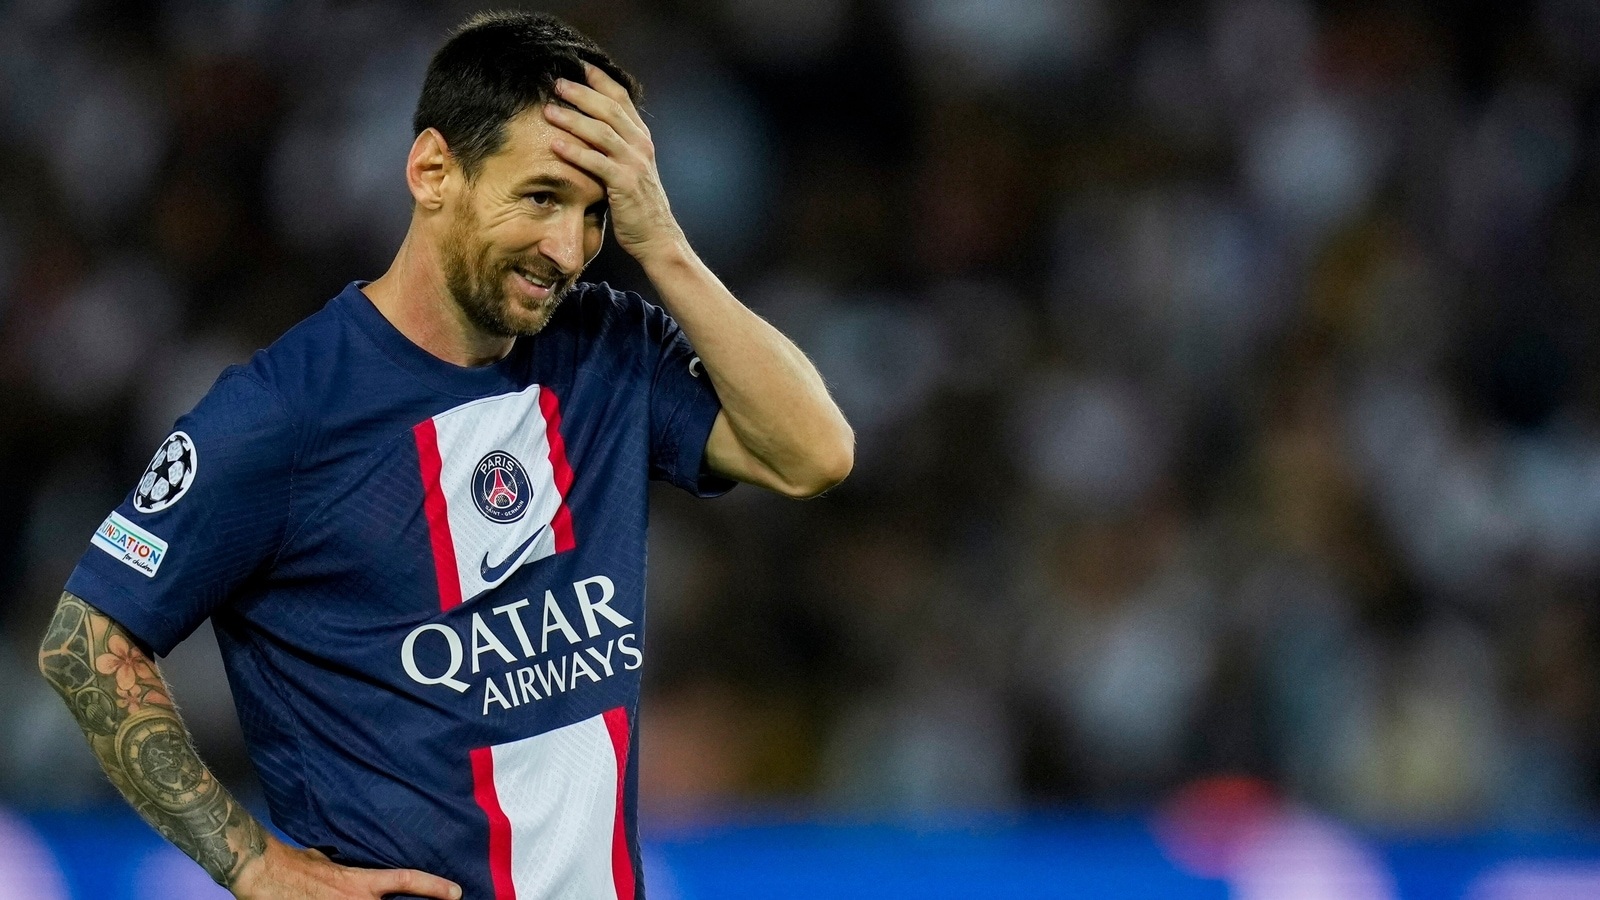 Messi is like a lost species, unable to show power at PSG (Image: Getty).